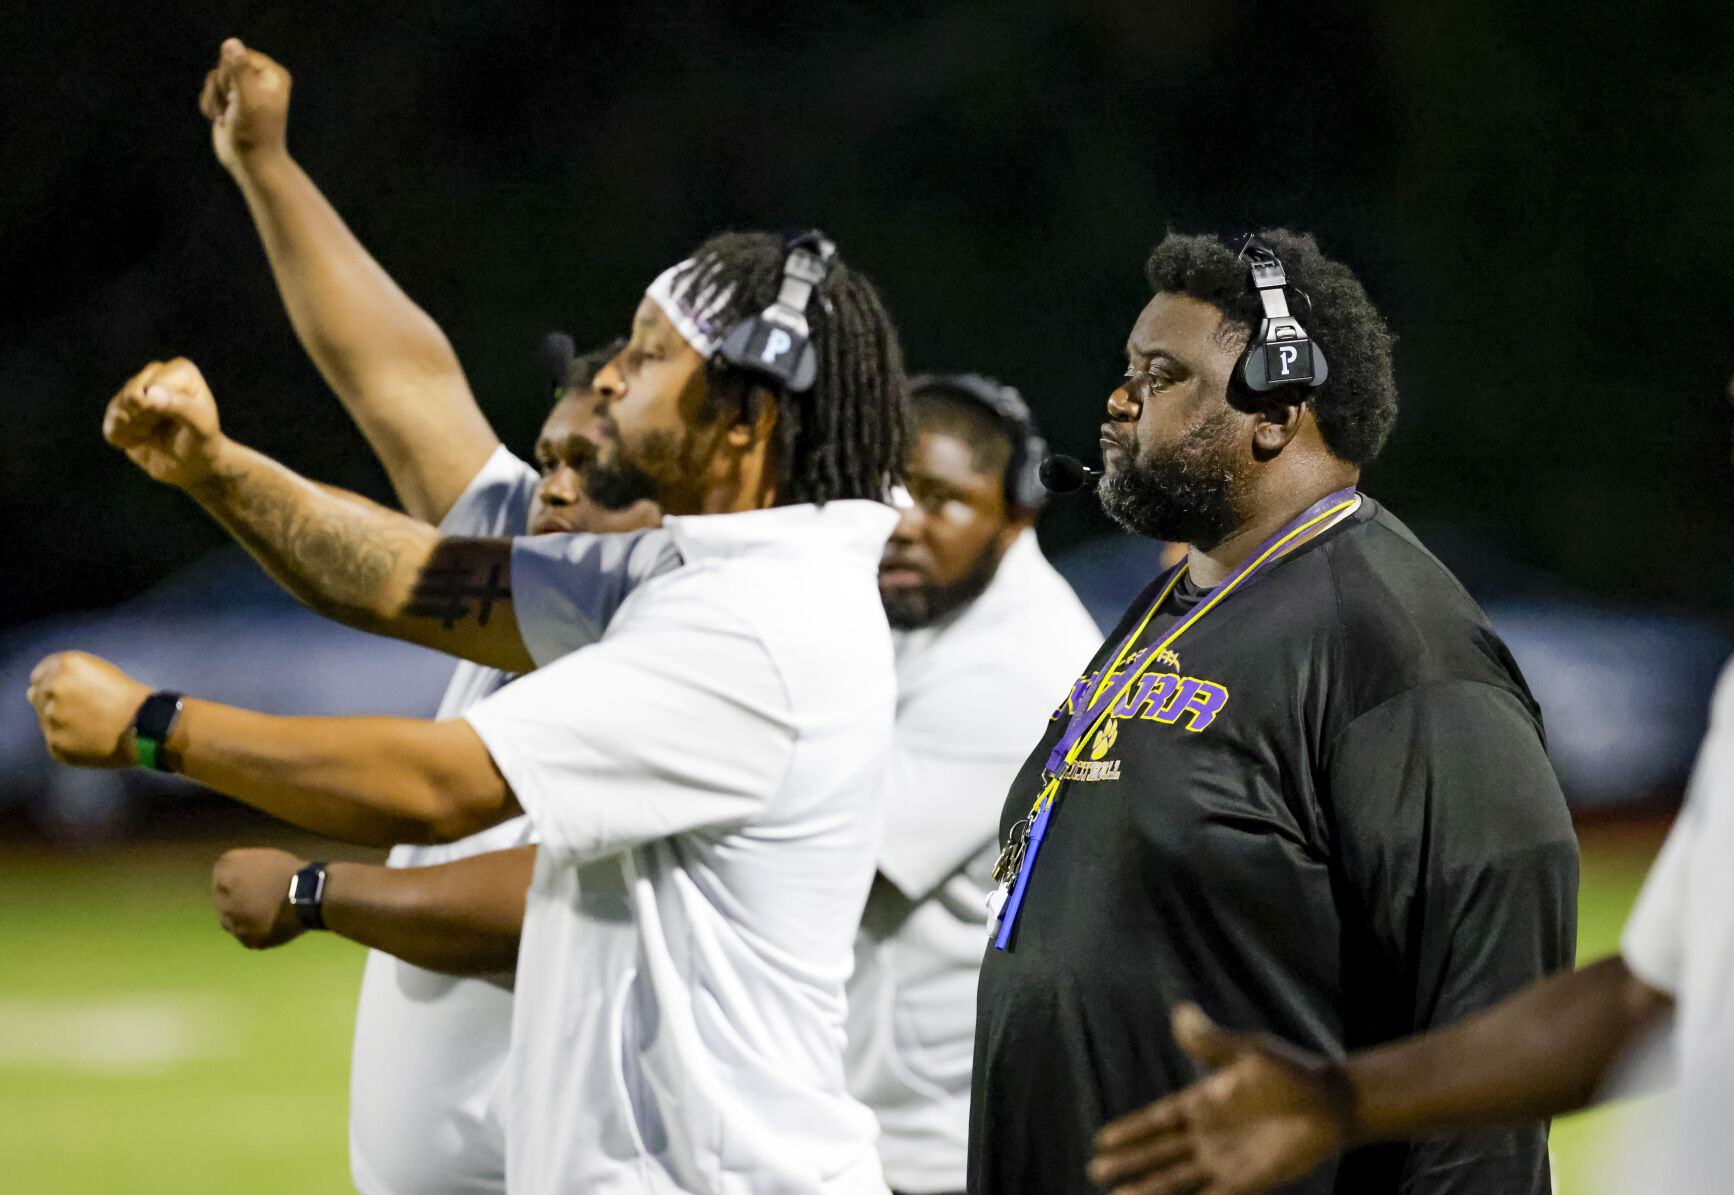 Edna Karr and St. Charles on Brink of State Finals as New Orleans Schools Dominate Semifinals